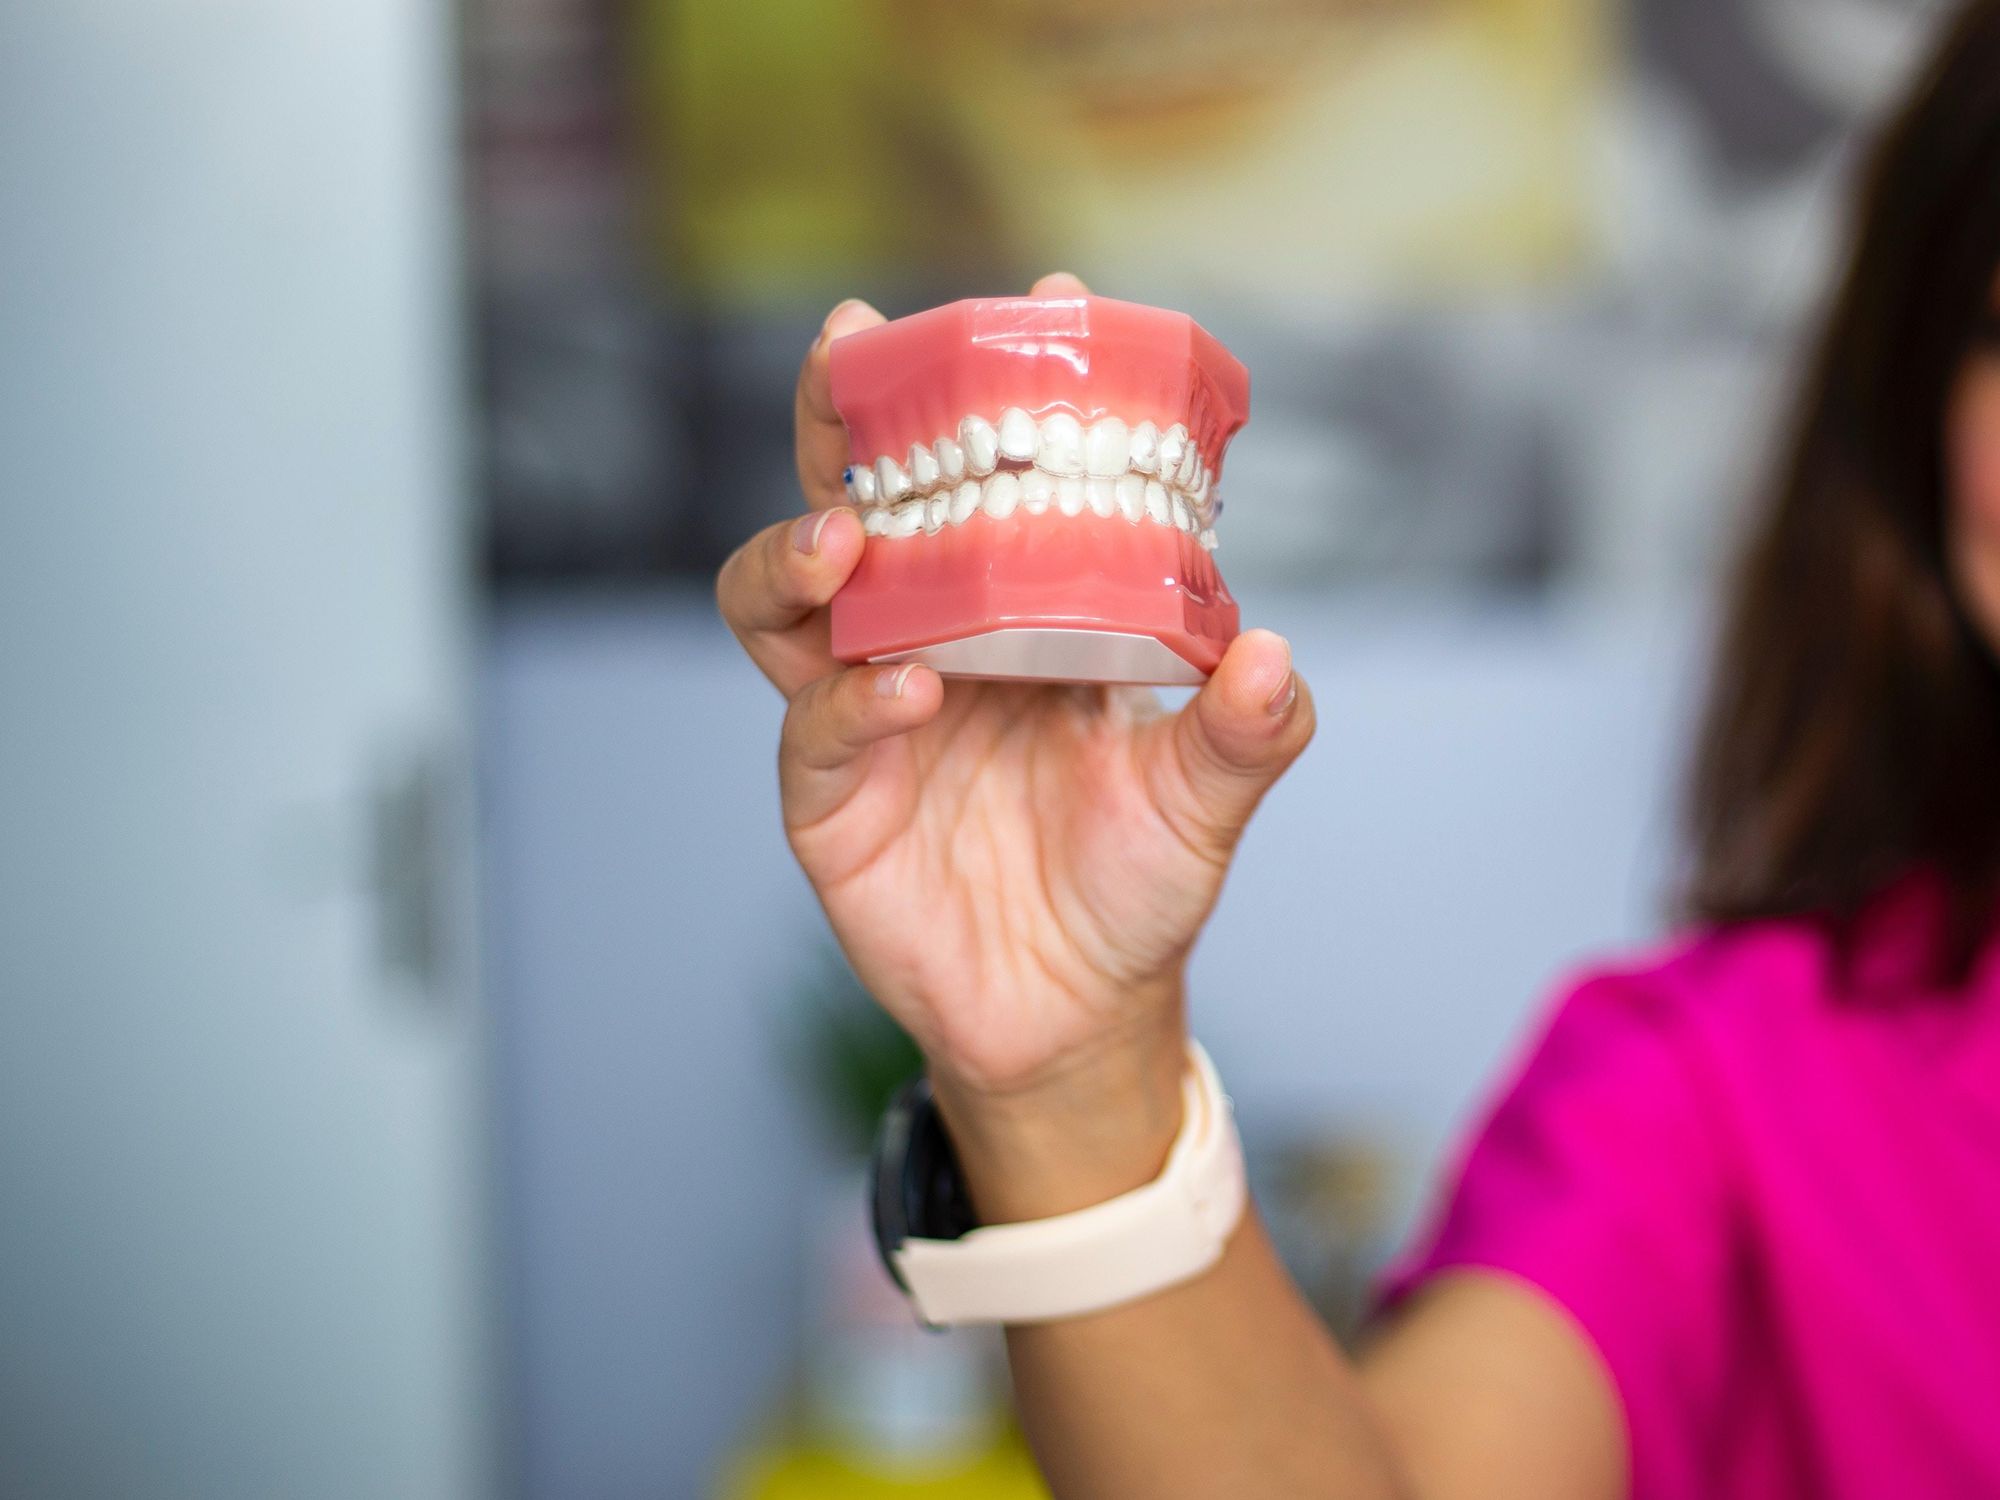 'The Zoom Effect' Is Fueling a Wave of Dental Procedures. InBrace is Cashing In.